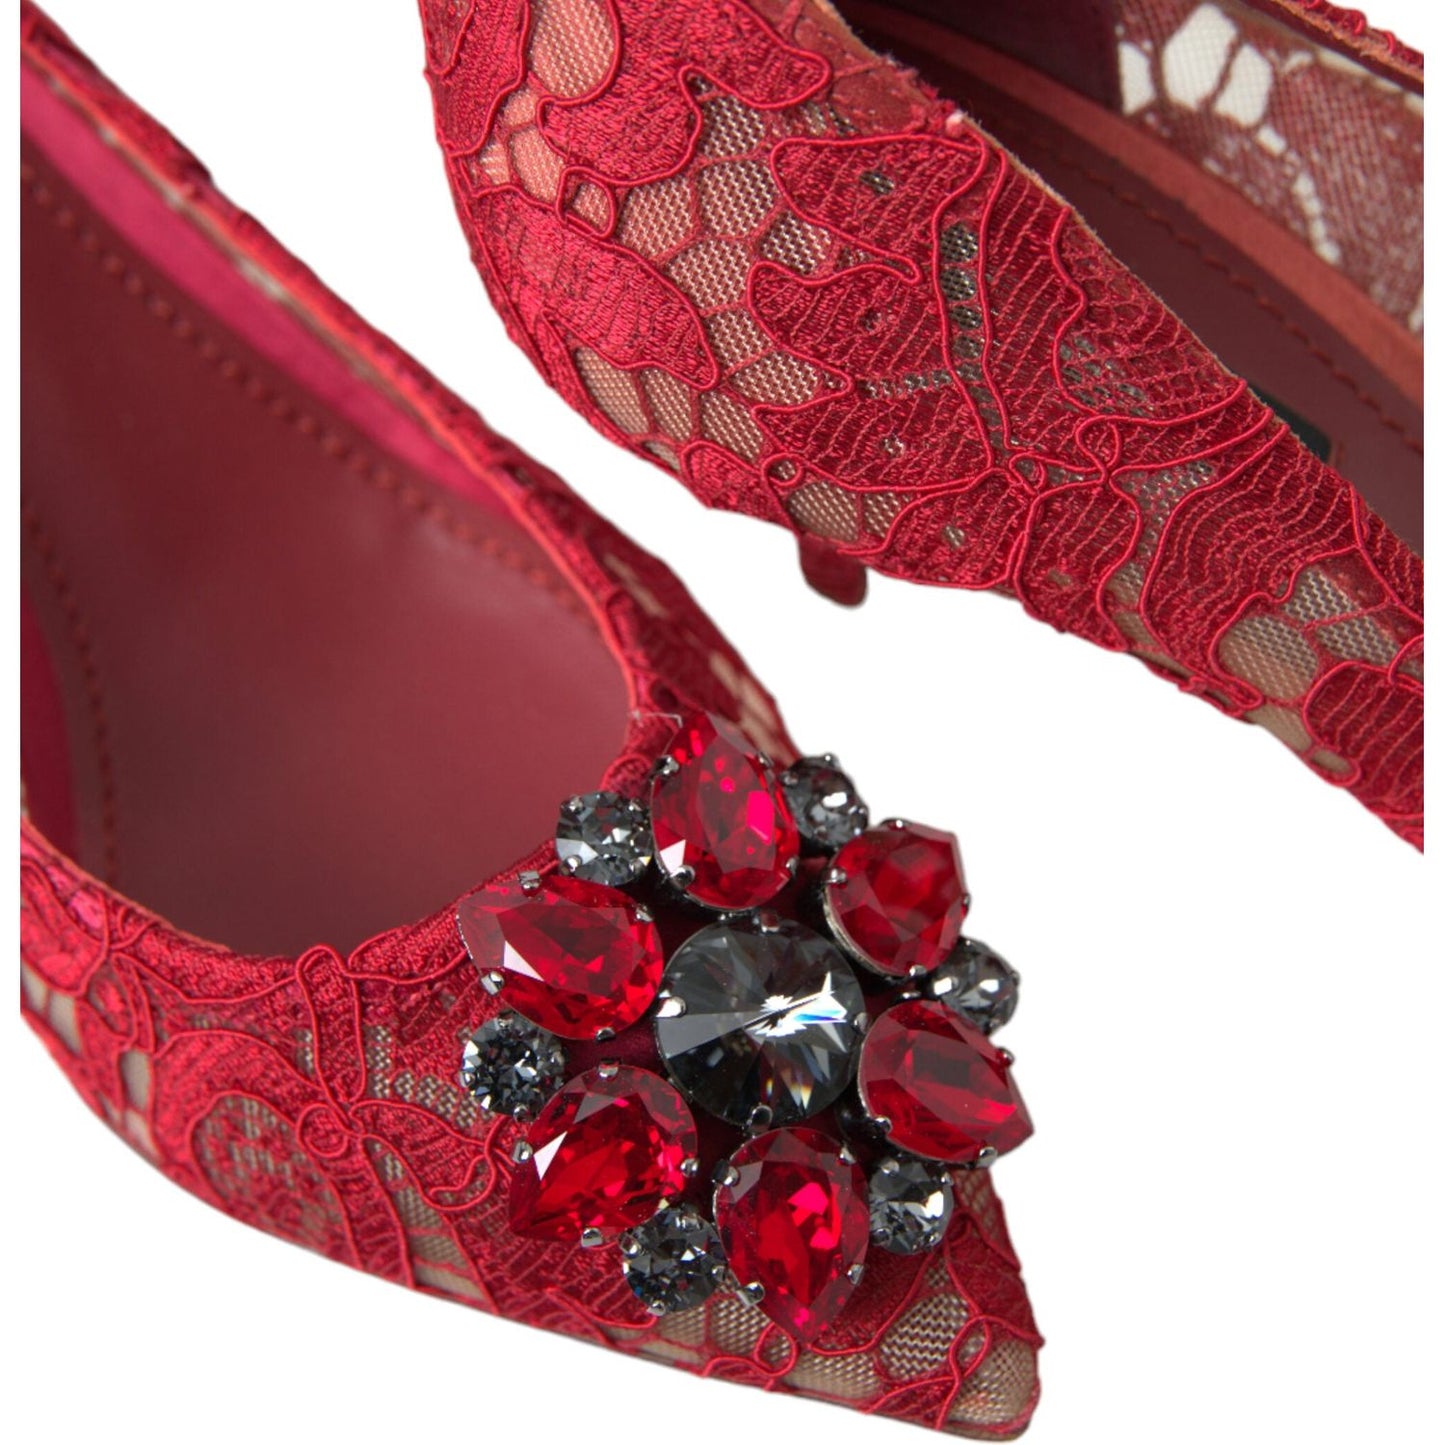 Dolce & Gabbana Radiant Red Lace Heels with Crystals red-taormina-lace-crystal-heels-pumps-shoes-2 465A9604-bg-scaled-a6e58a4f-1ea.jpg